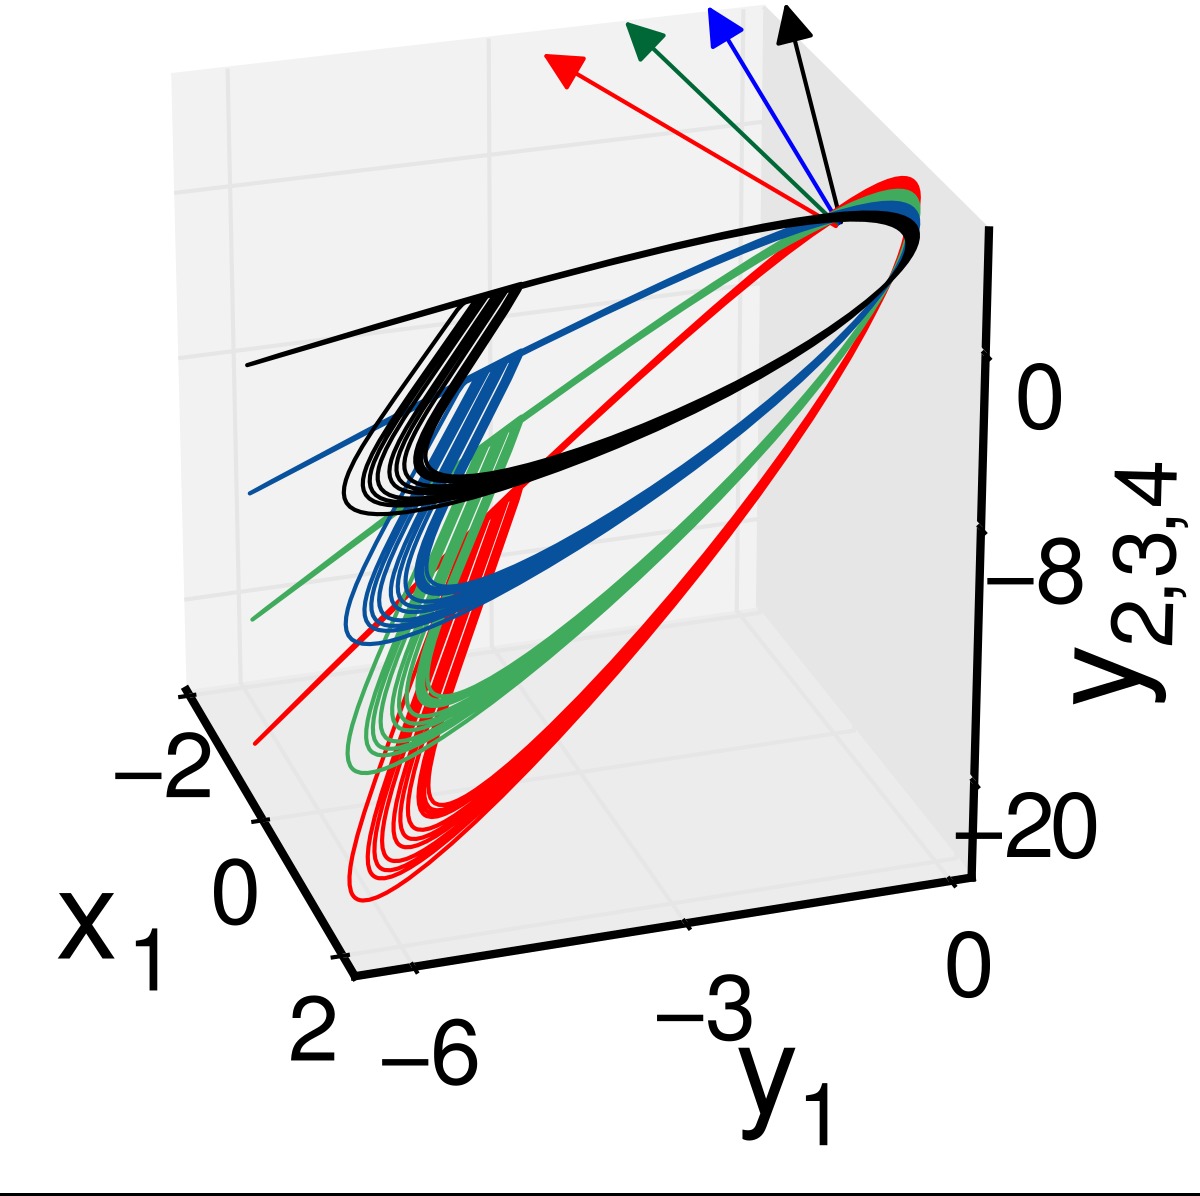 Figure 3: A 4-node network motif (left panel). Solid (black) and dashed (red) arrows represent self- and cross-coupling links, respectively. Right panel: projection of synchronization hyperplanes. Color arrows show rotation along the transverse direction to their respective hyperplanes. Parameters are b1=1, b2=2, b3=3, b4=4, respectively, for black, blue, green and red hyperplanes.    and  .